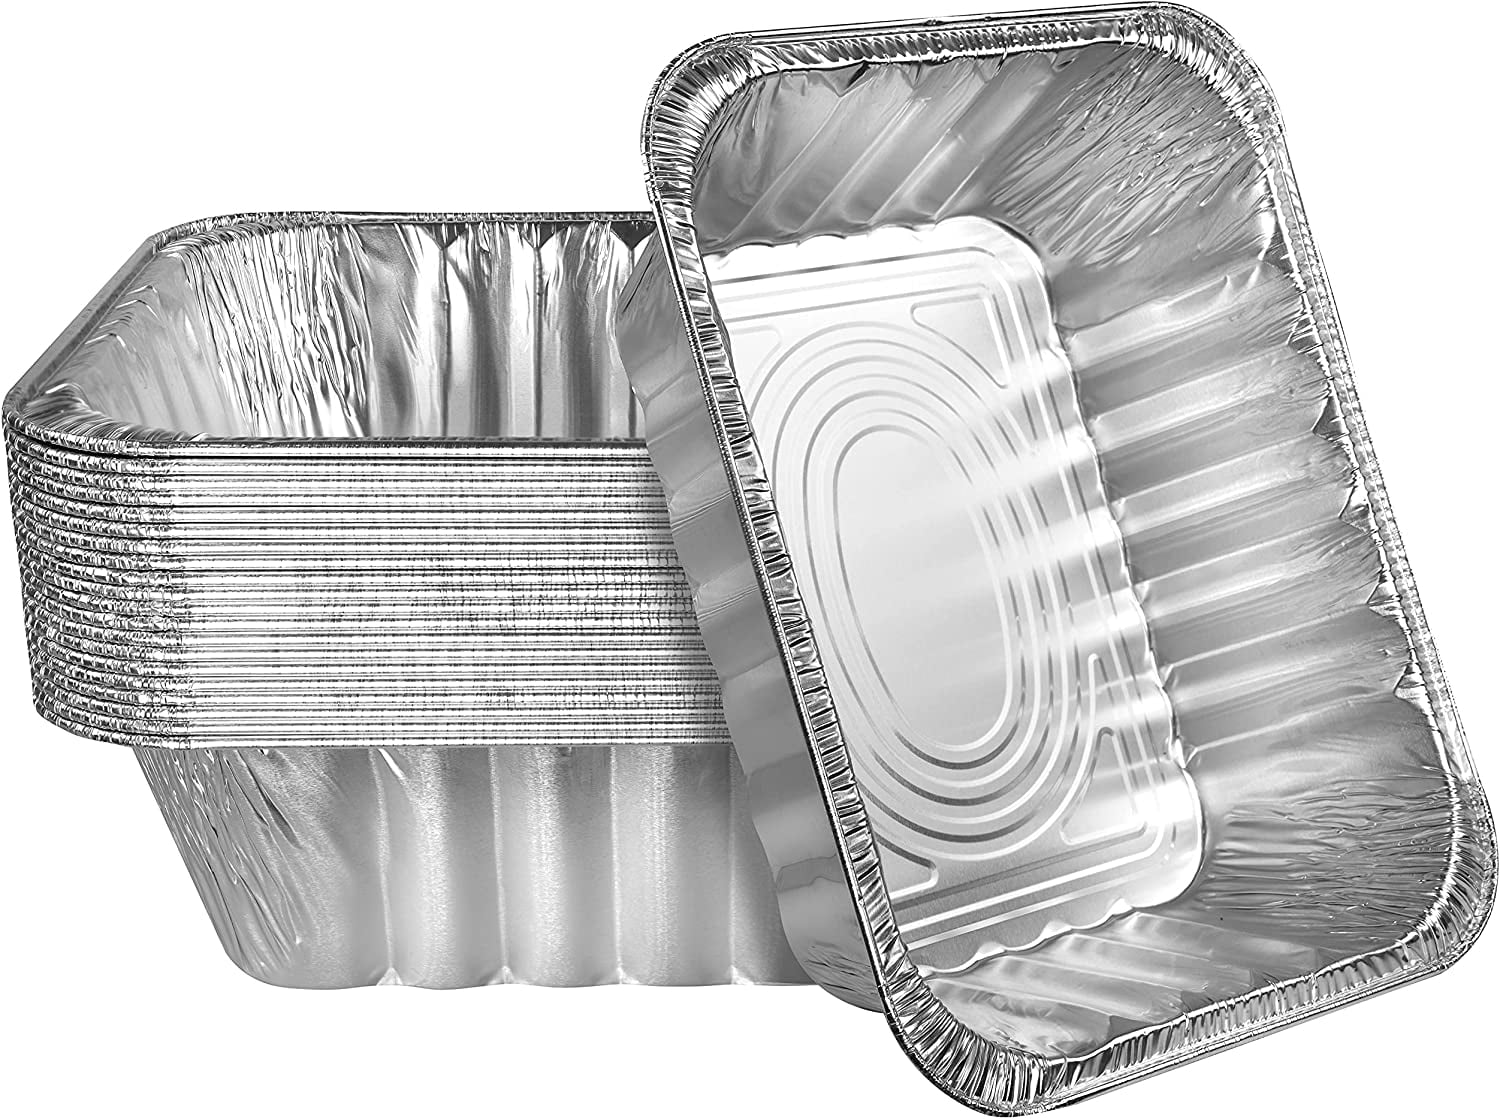 Nicole Fantini Full Size Deep Aluminum Foil Roasting & Steam Table Pans - Deep Pan for Catering Large Groups - Disposable Pans Great for Cooking